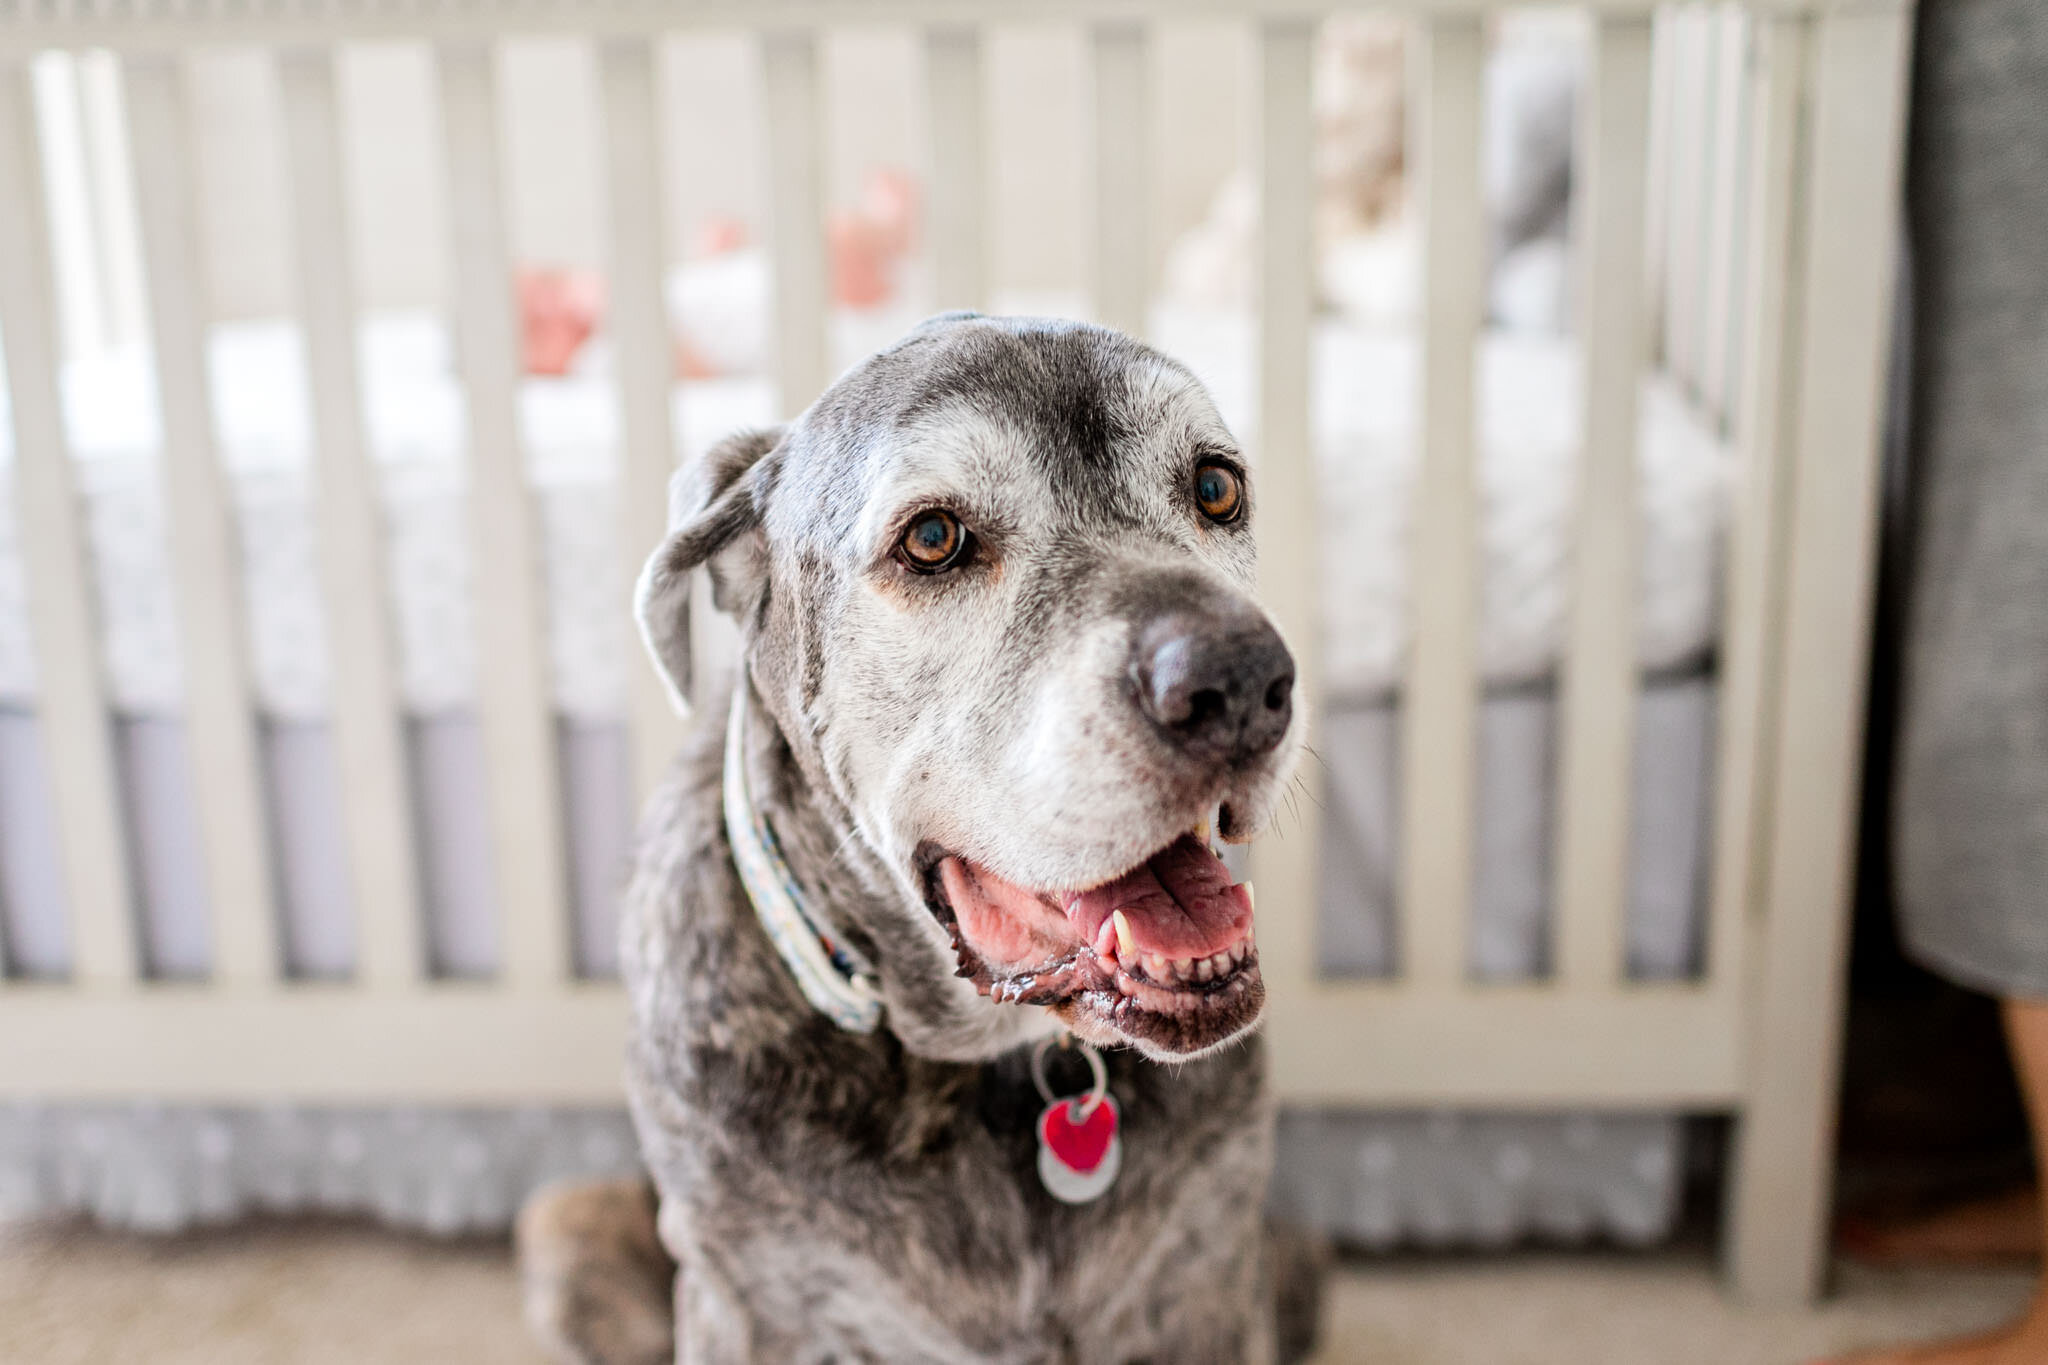 Dog sitting in front of baby crib | Durham Newborn Photographer | By G. Lin Photography